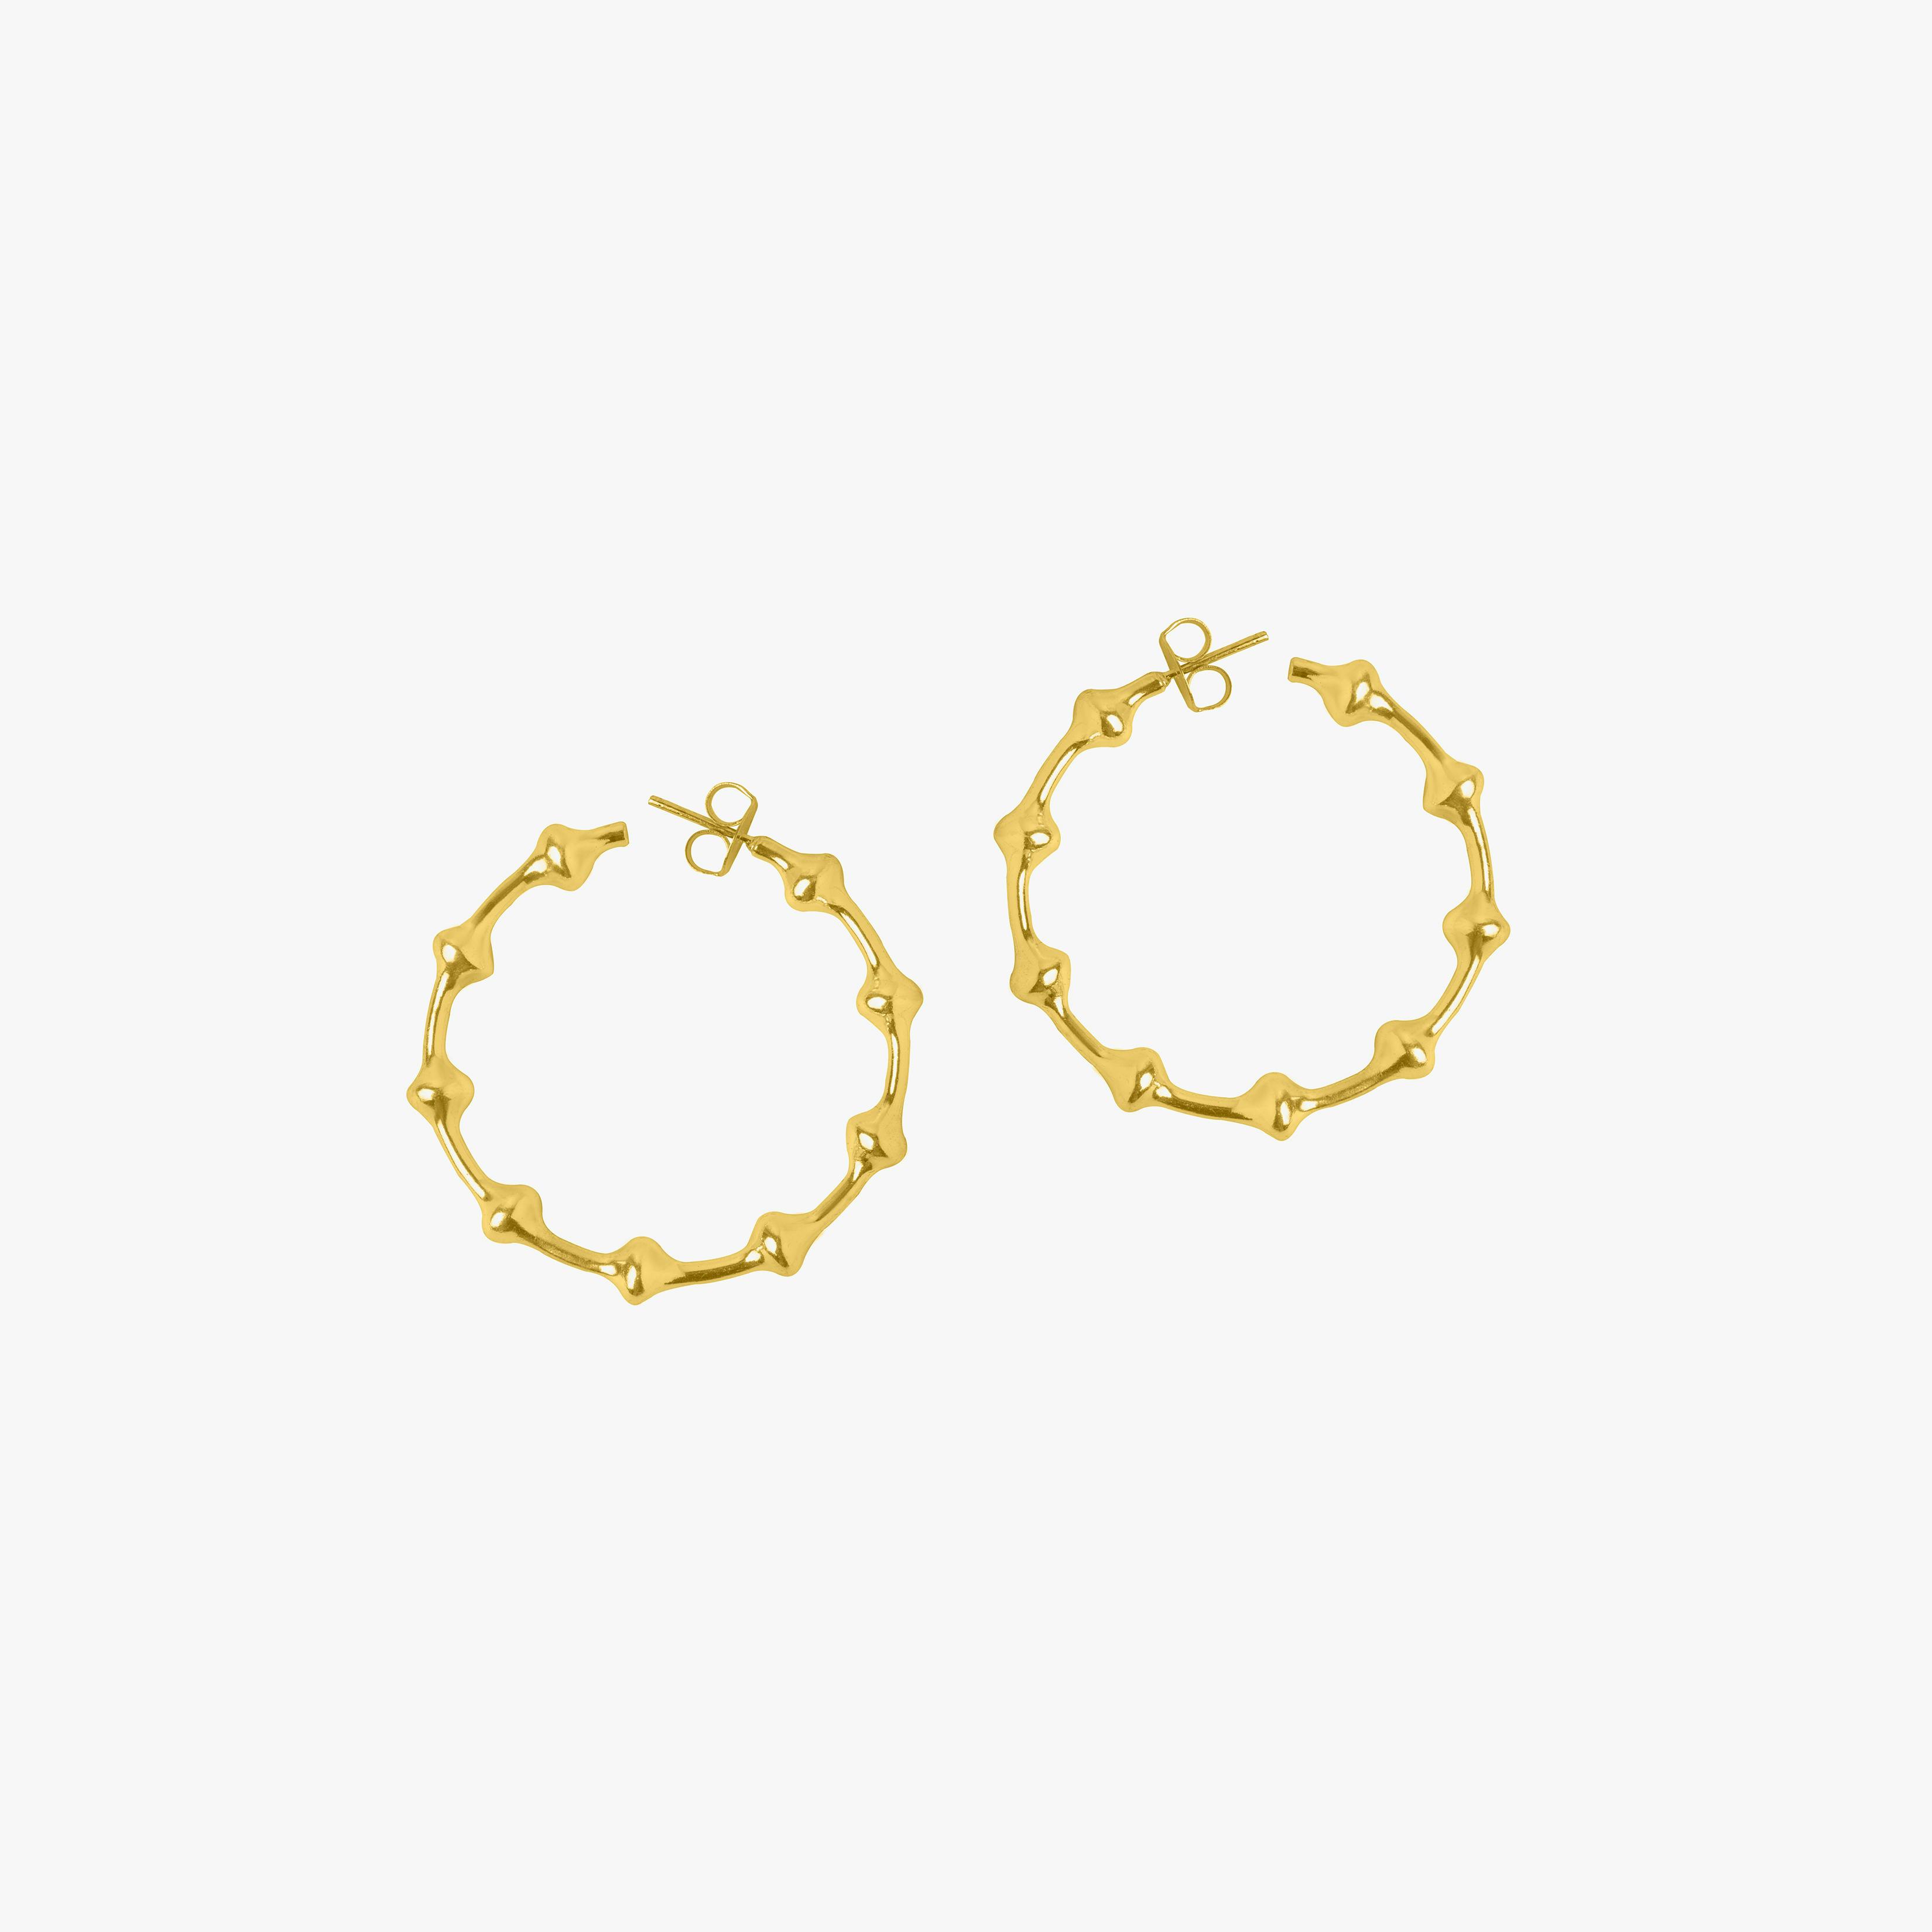 SYMPHONY EARRINGS - GOLD TONE, a product by Equiivalence